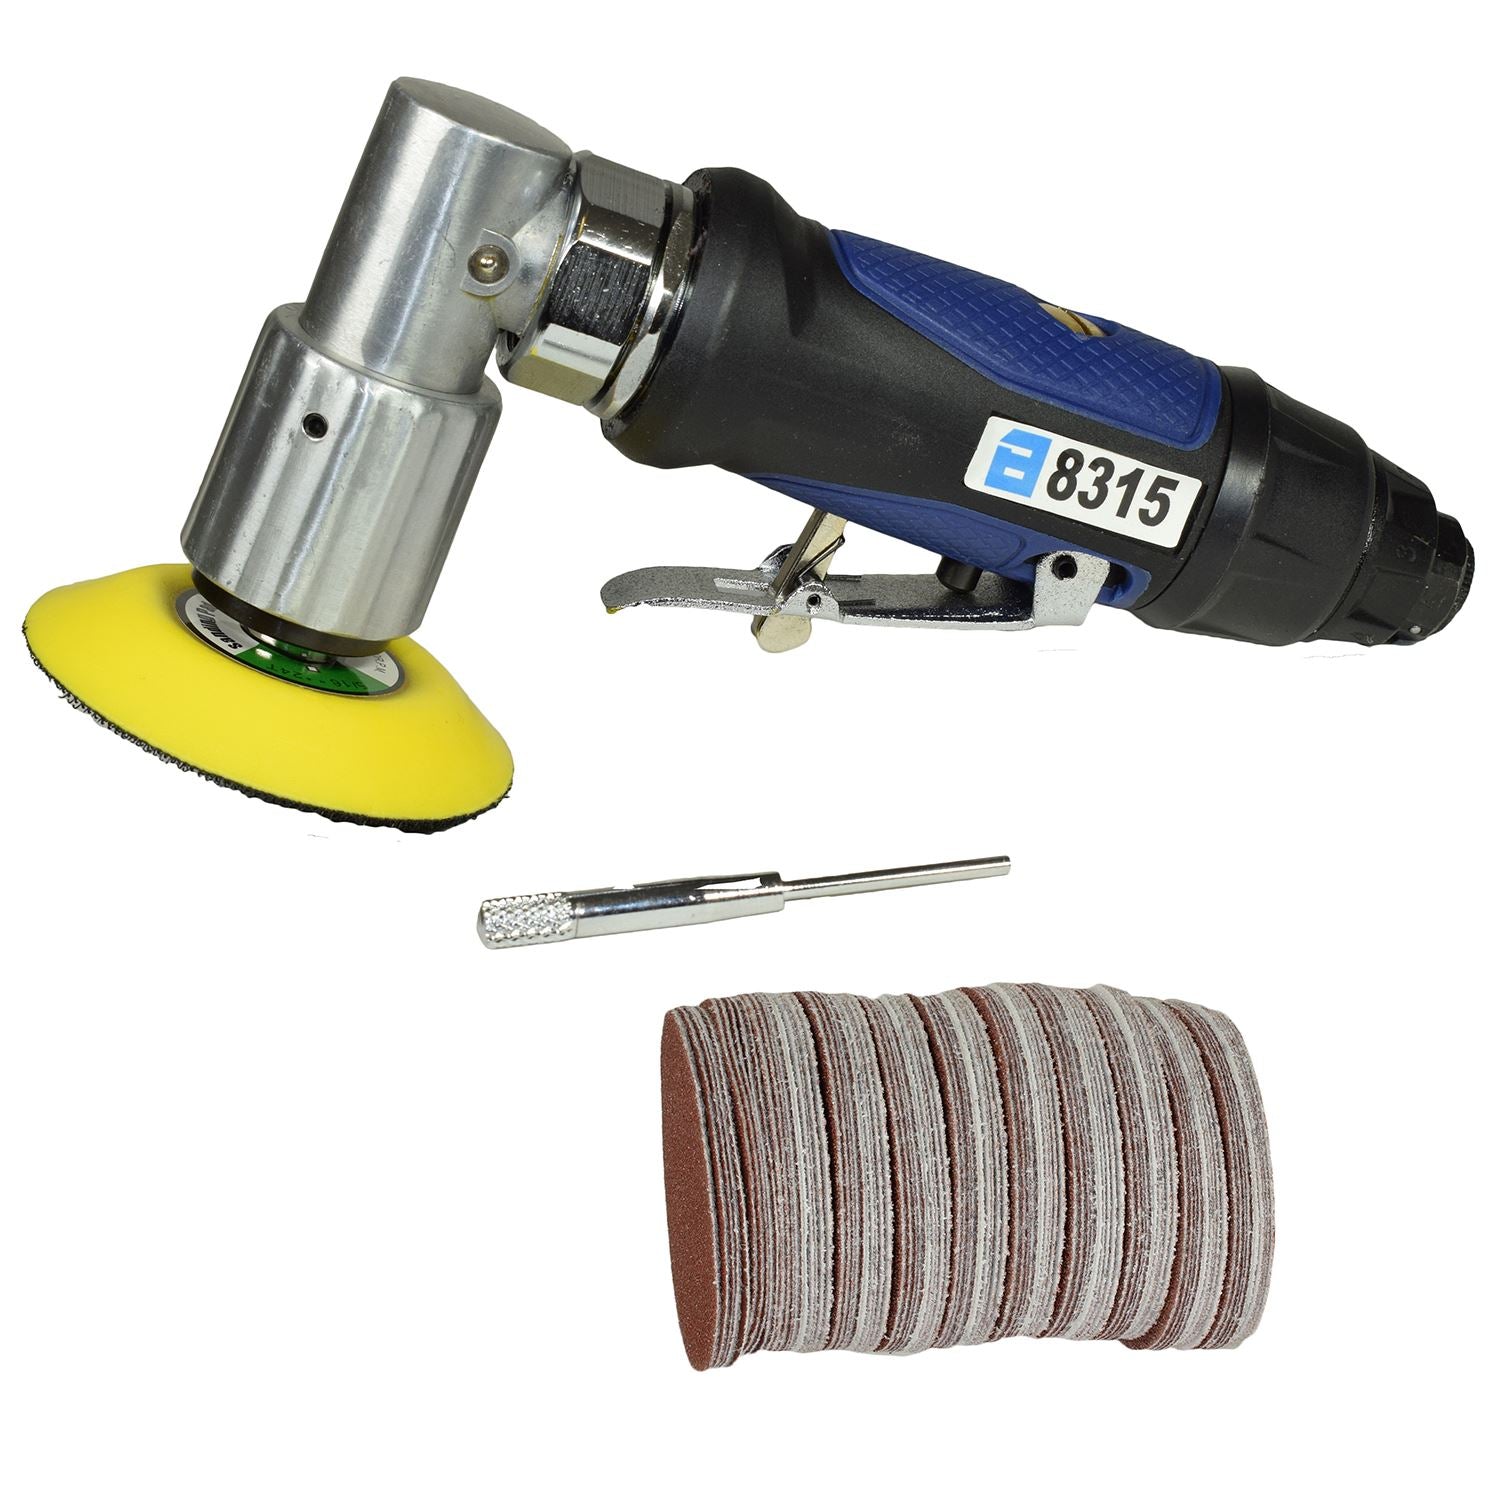 3" 75mm Air Angle Sander Grinder Polisher Sanding and 100 pack mixed discs